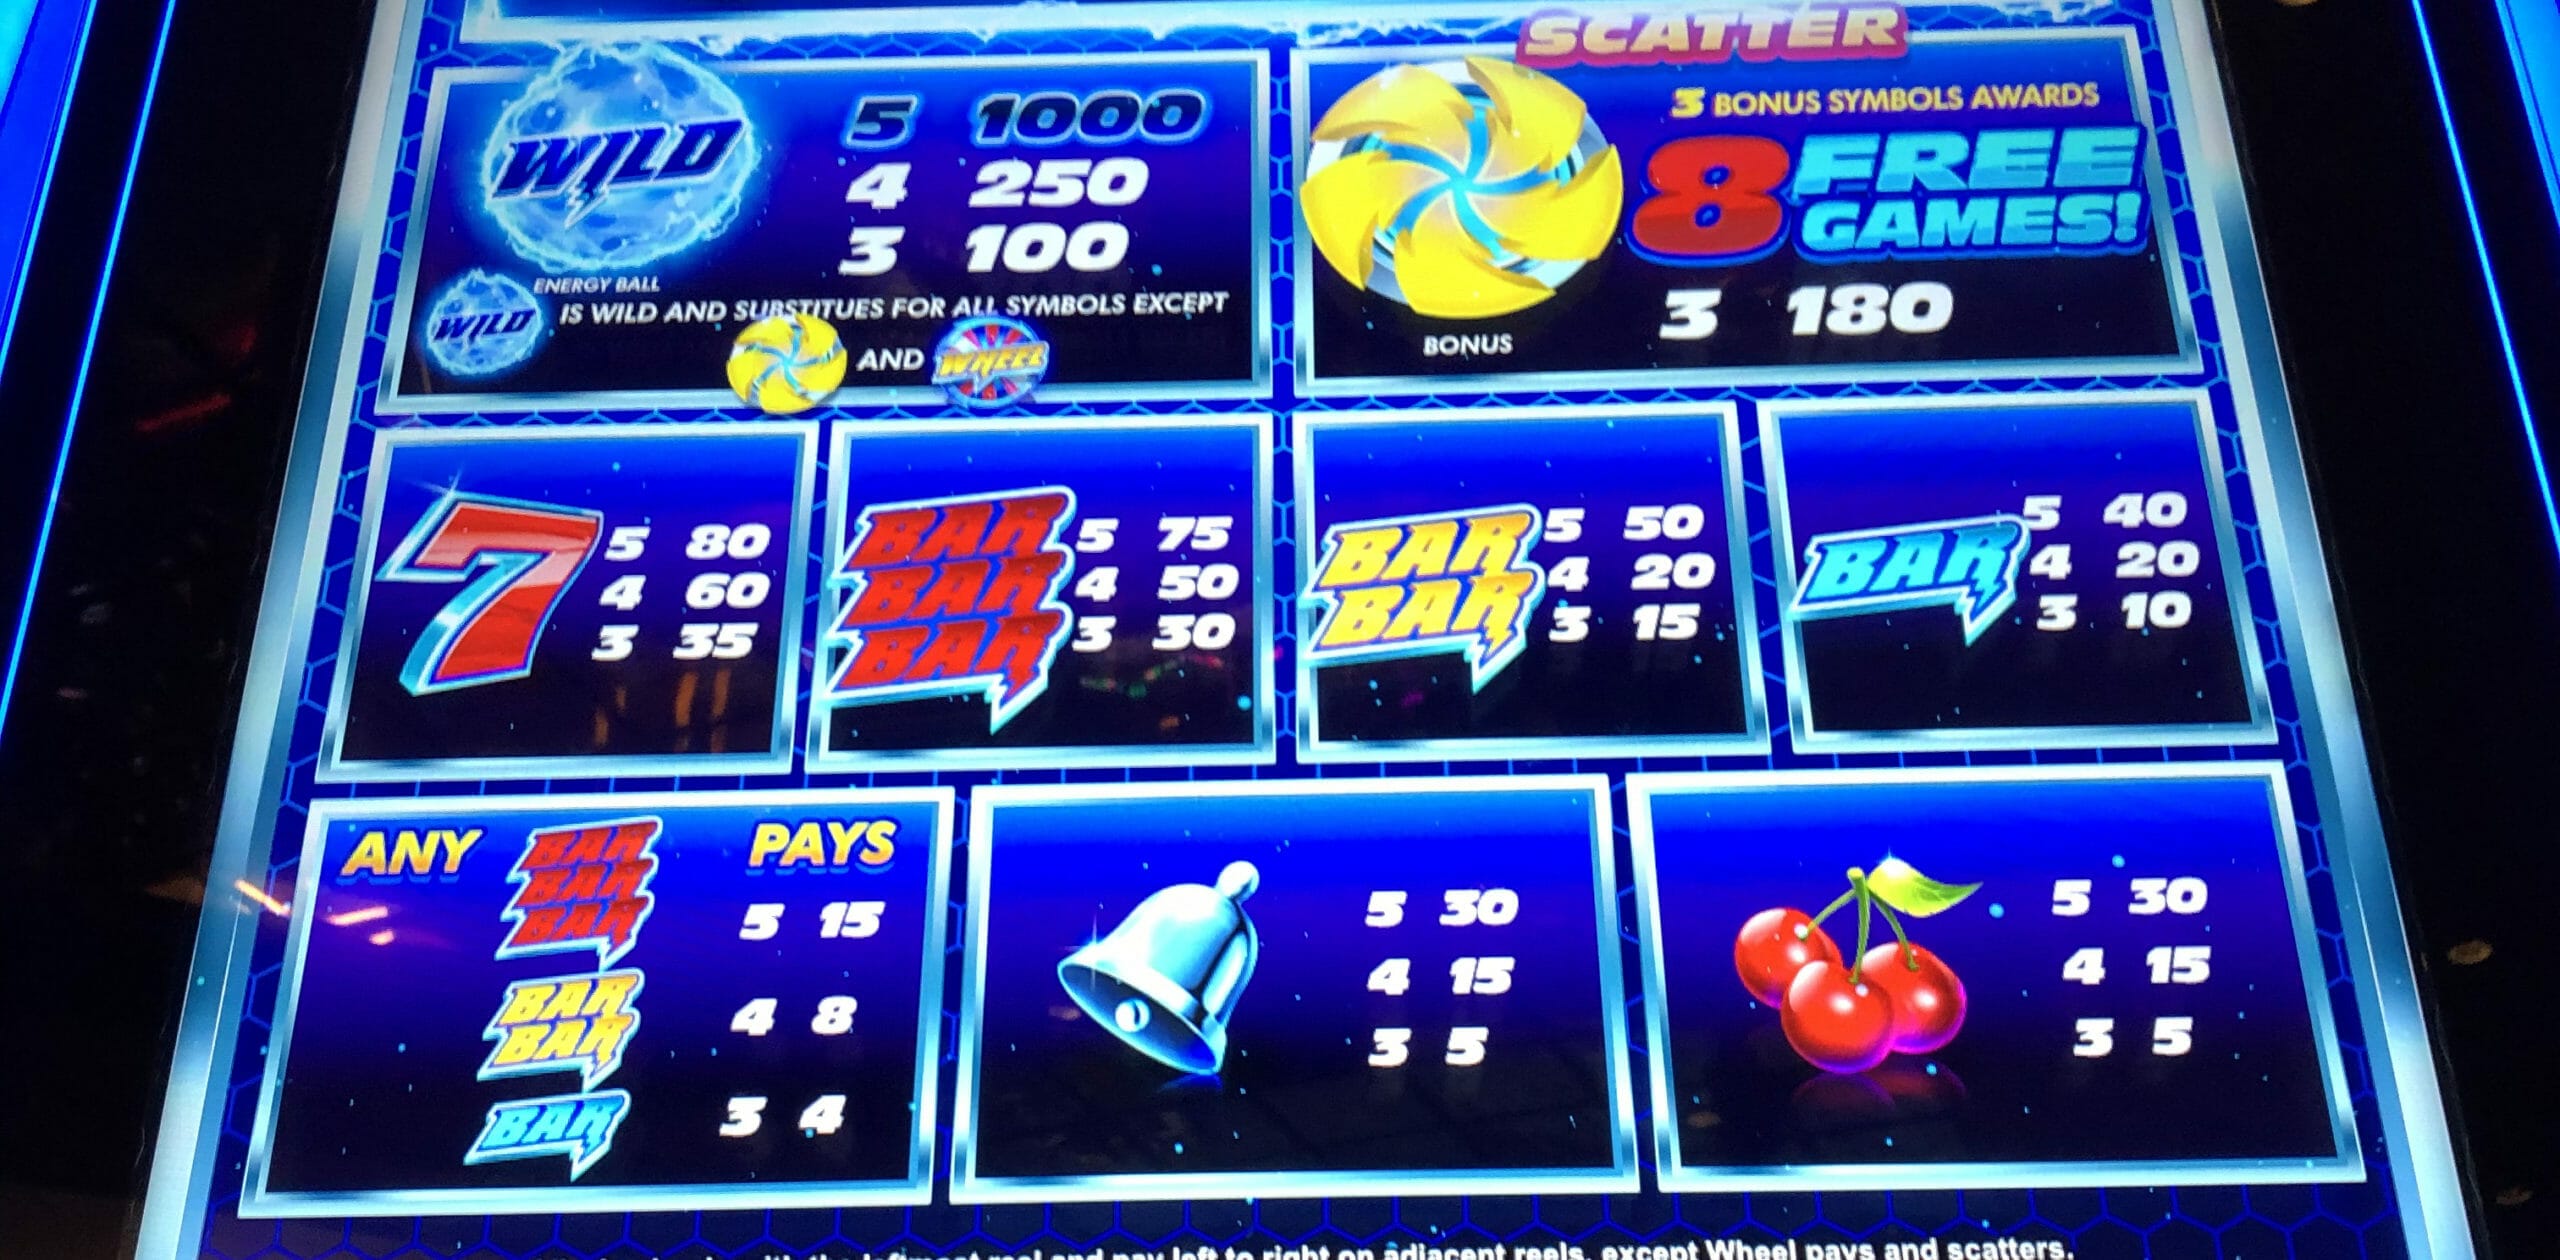 white water slot machine payout table